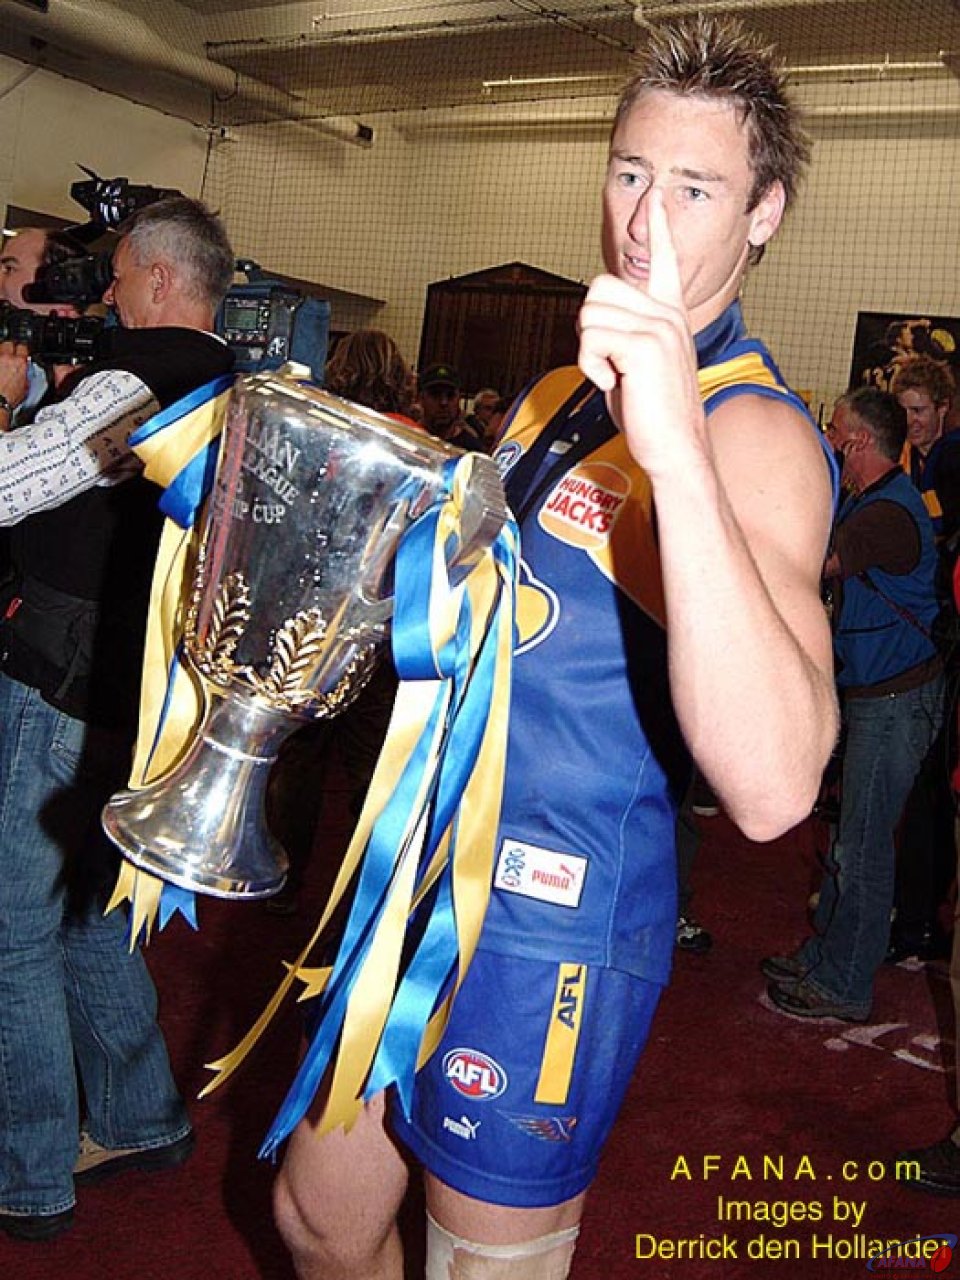 [b]The spils of victory, the treasured Premiers Cup and the no.1 salute[/b]